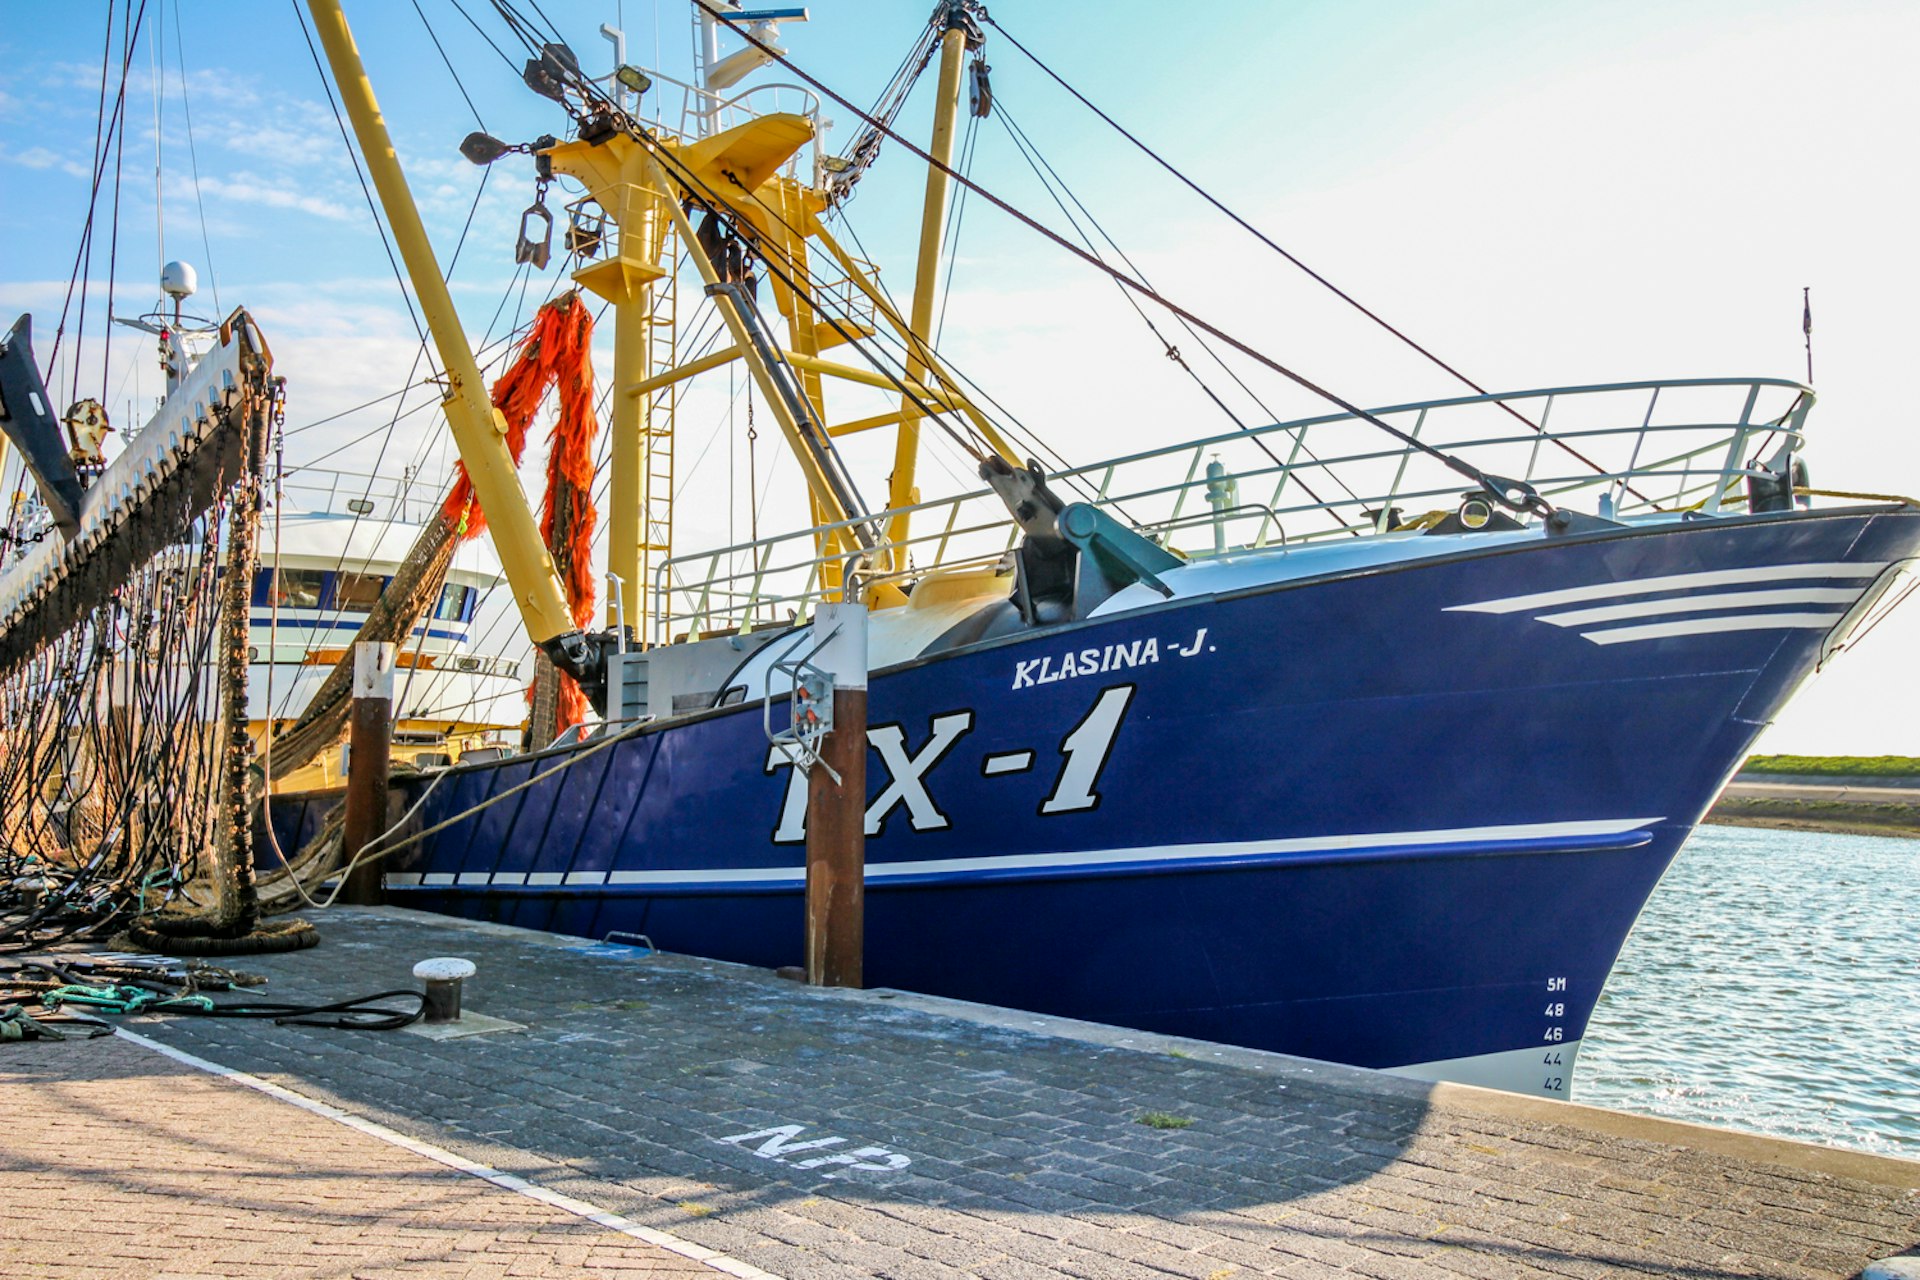 A fishing boat docked at a Texel harbour © Catherine Le Nevez / Lonely Planet